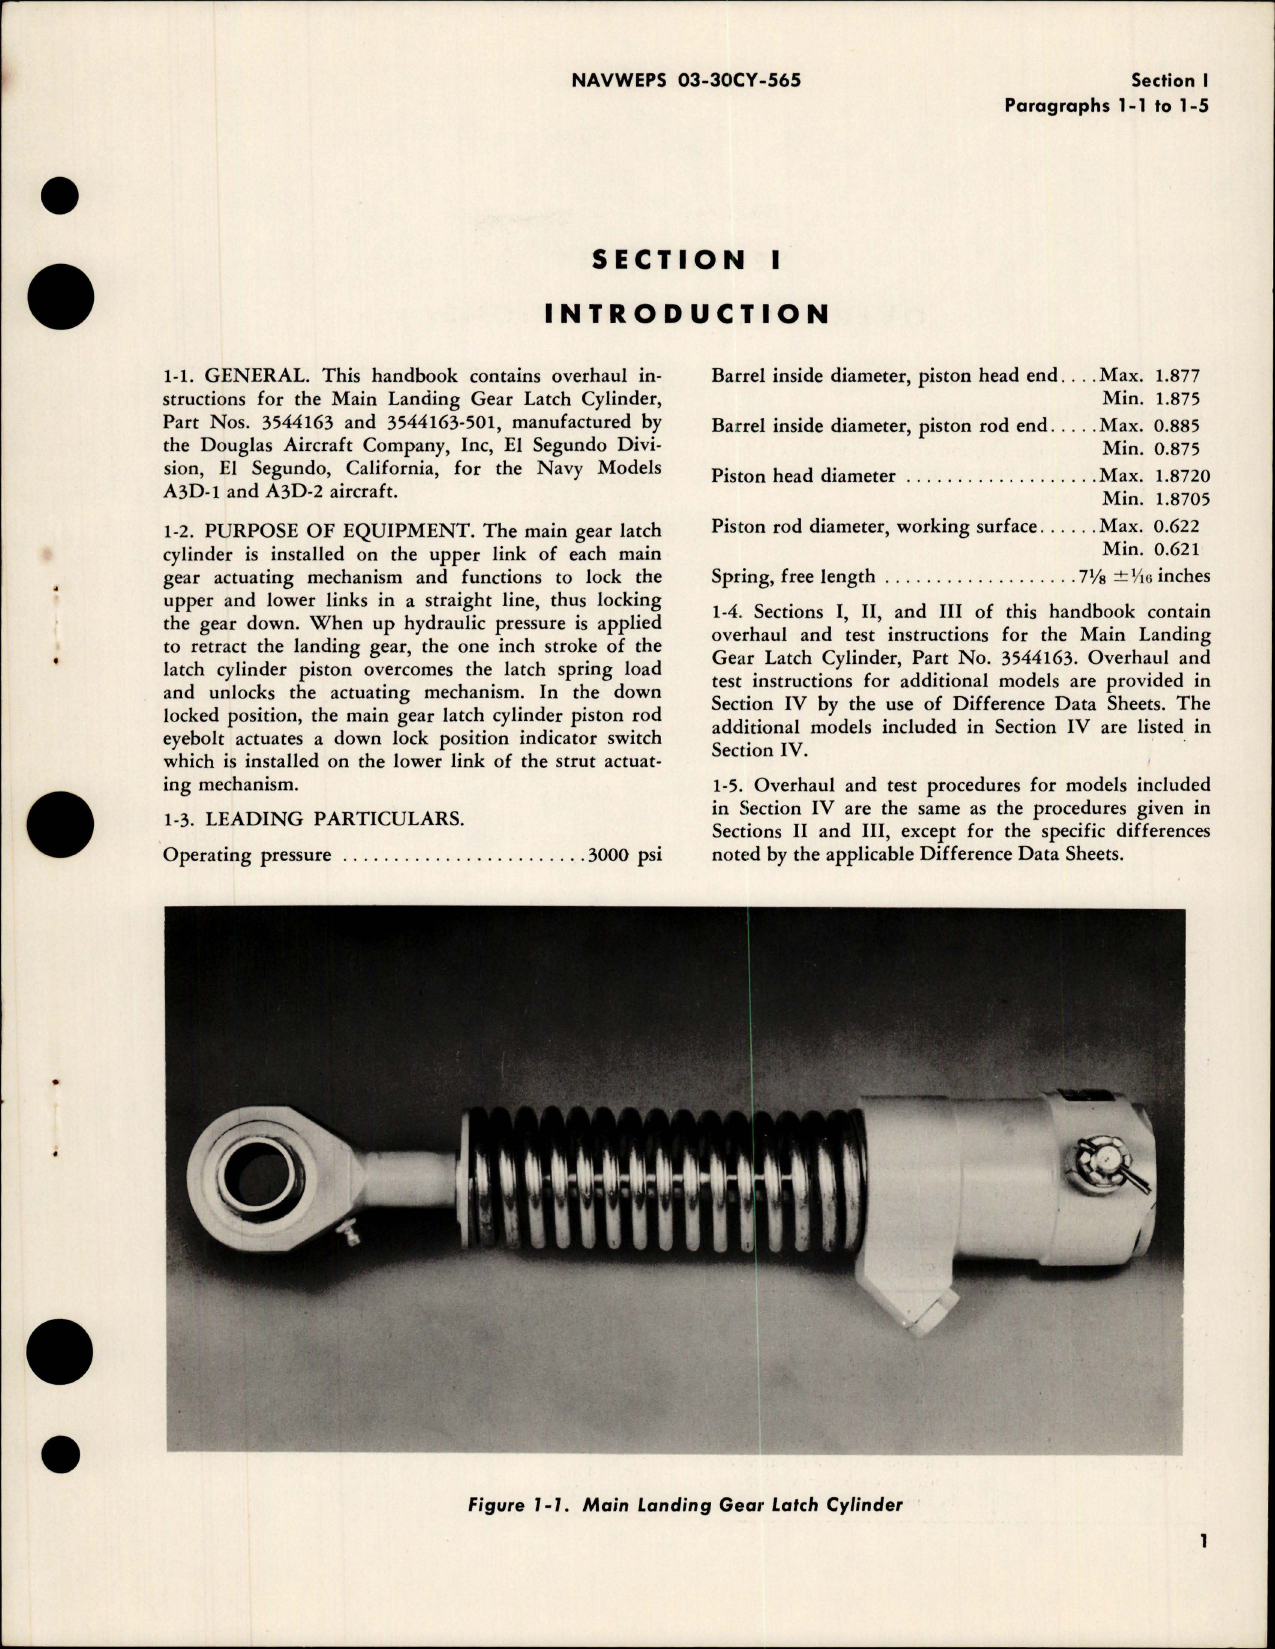 Sample page 5 from AirCorps Library document: Overhaul Instructions for Main Landing Gear Latch Cylinder - Parts 3544163 and 3544163-501 